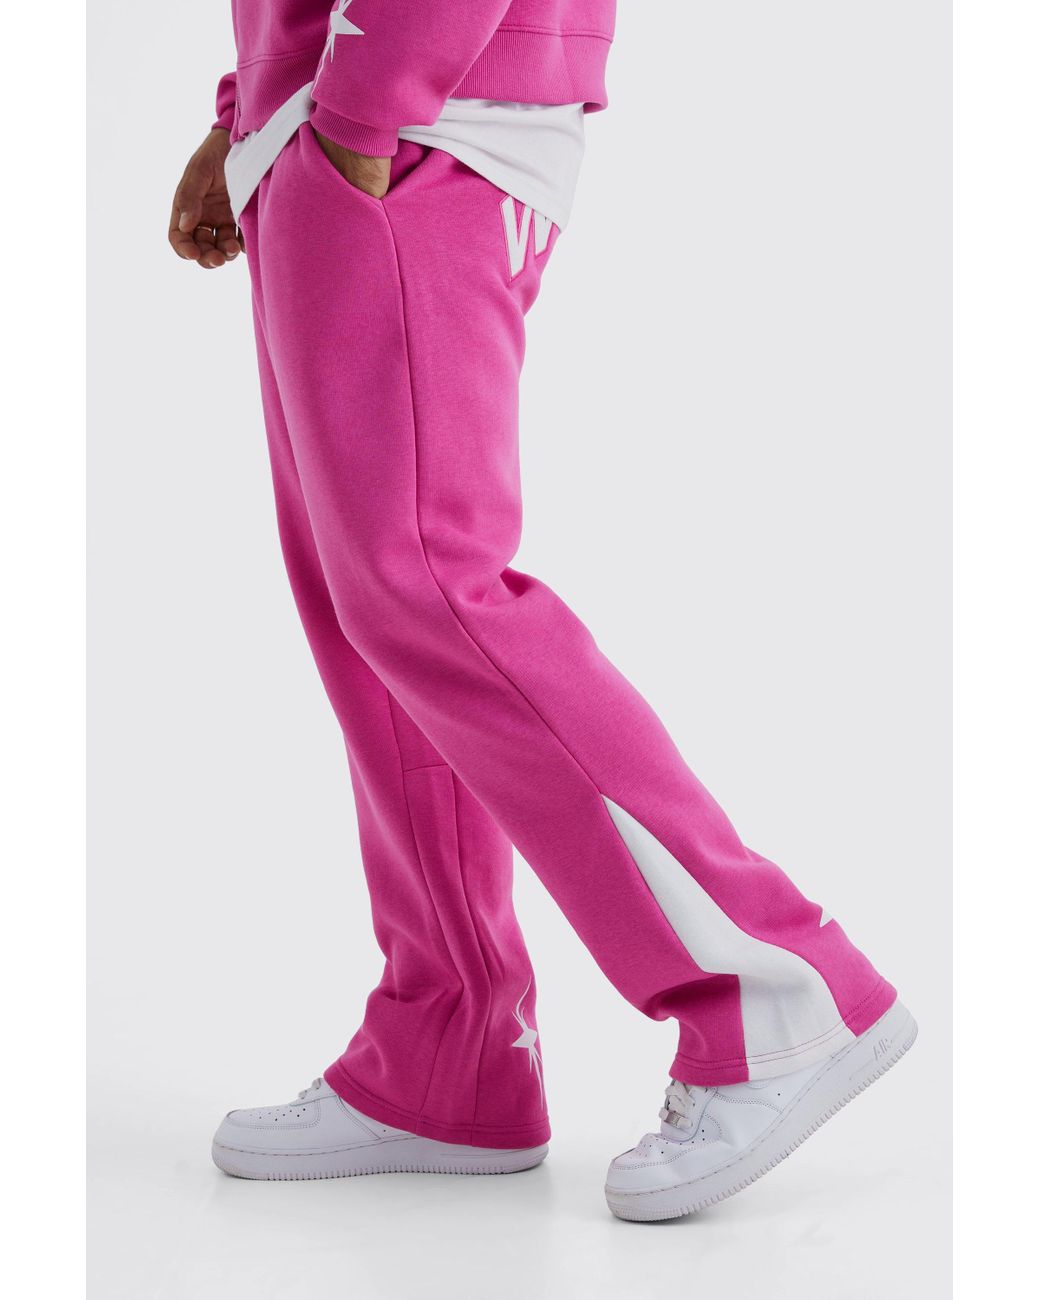 BoohooMAN Worldwide Star Gusset Jogger in Pink for Men